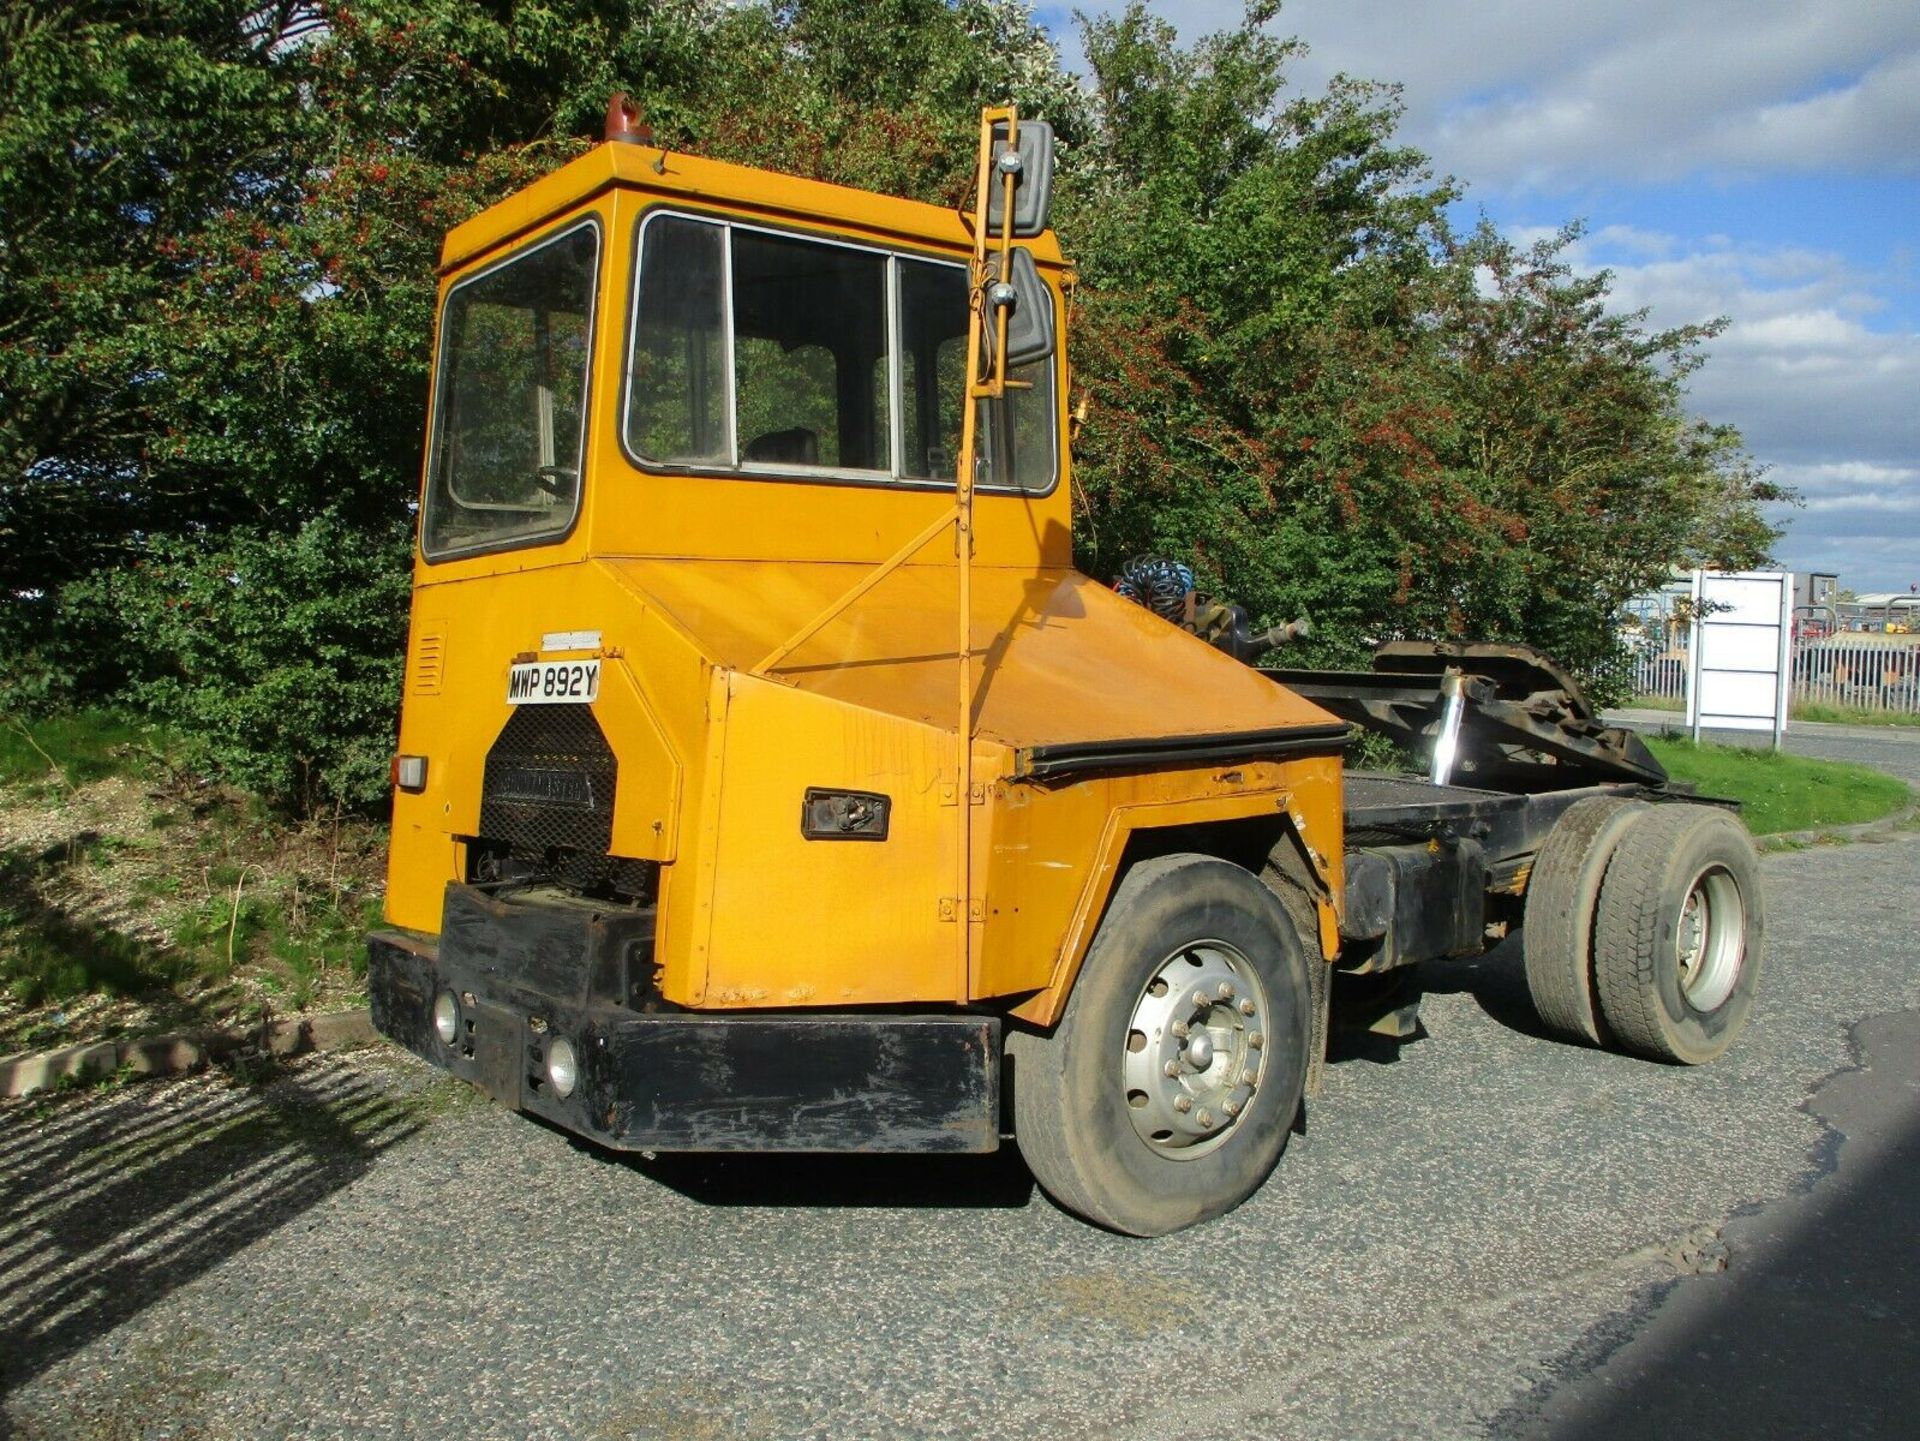 Reliance Dock spotter shunter tow tug tractor unit - Image 8 of 11